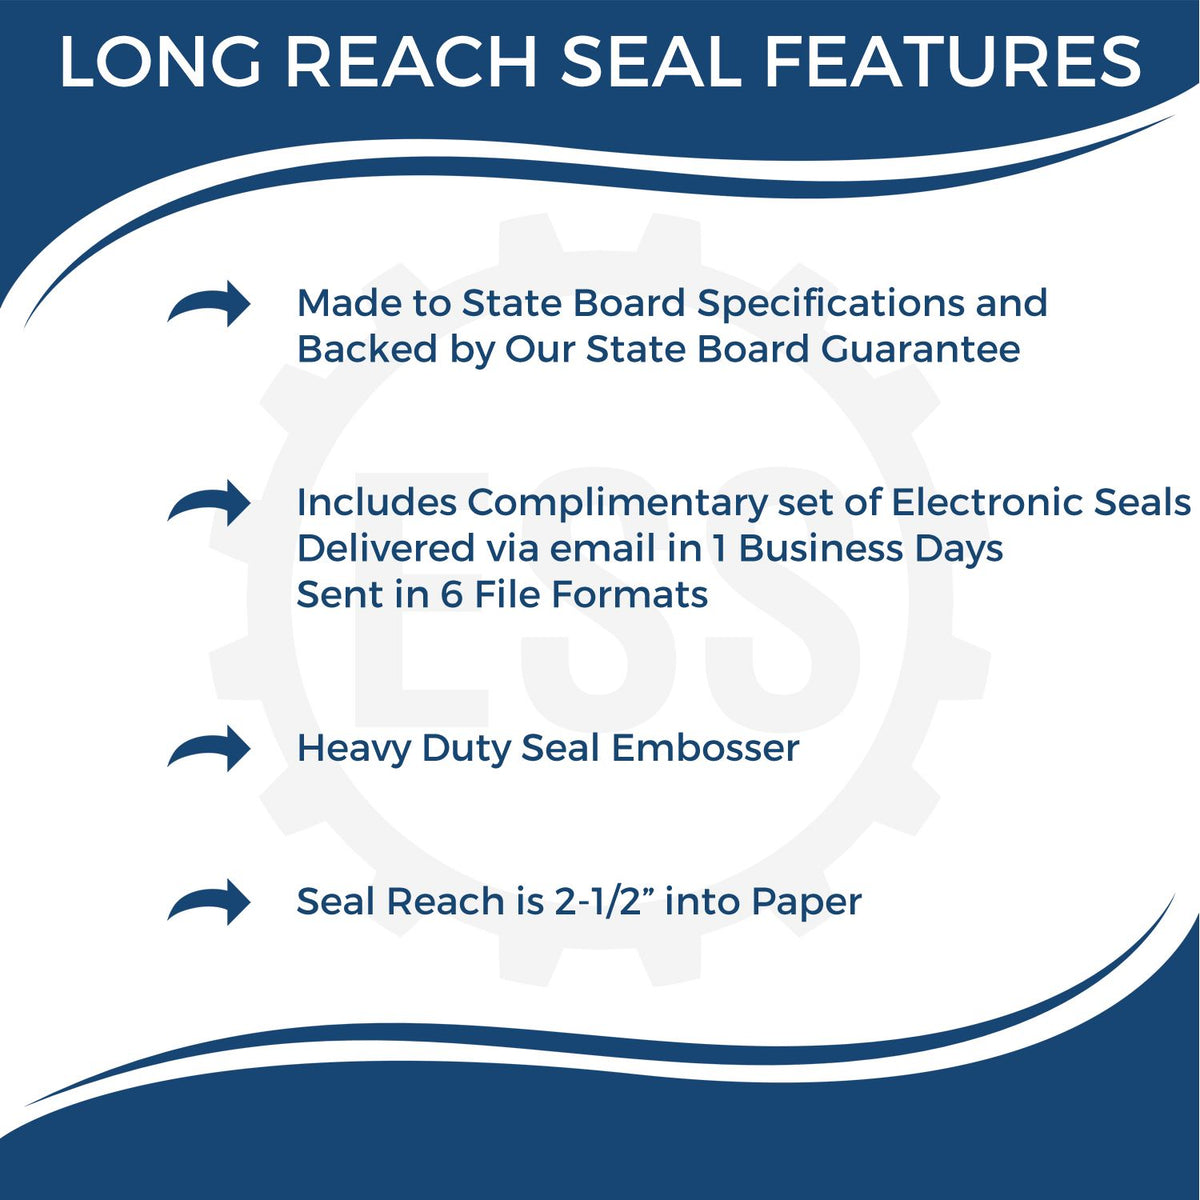 A picture of an infographic highlighting the selling points for the Long Reach Maine Land Surveyor Seal